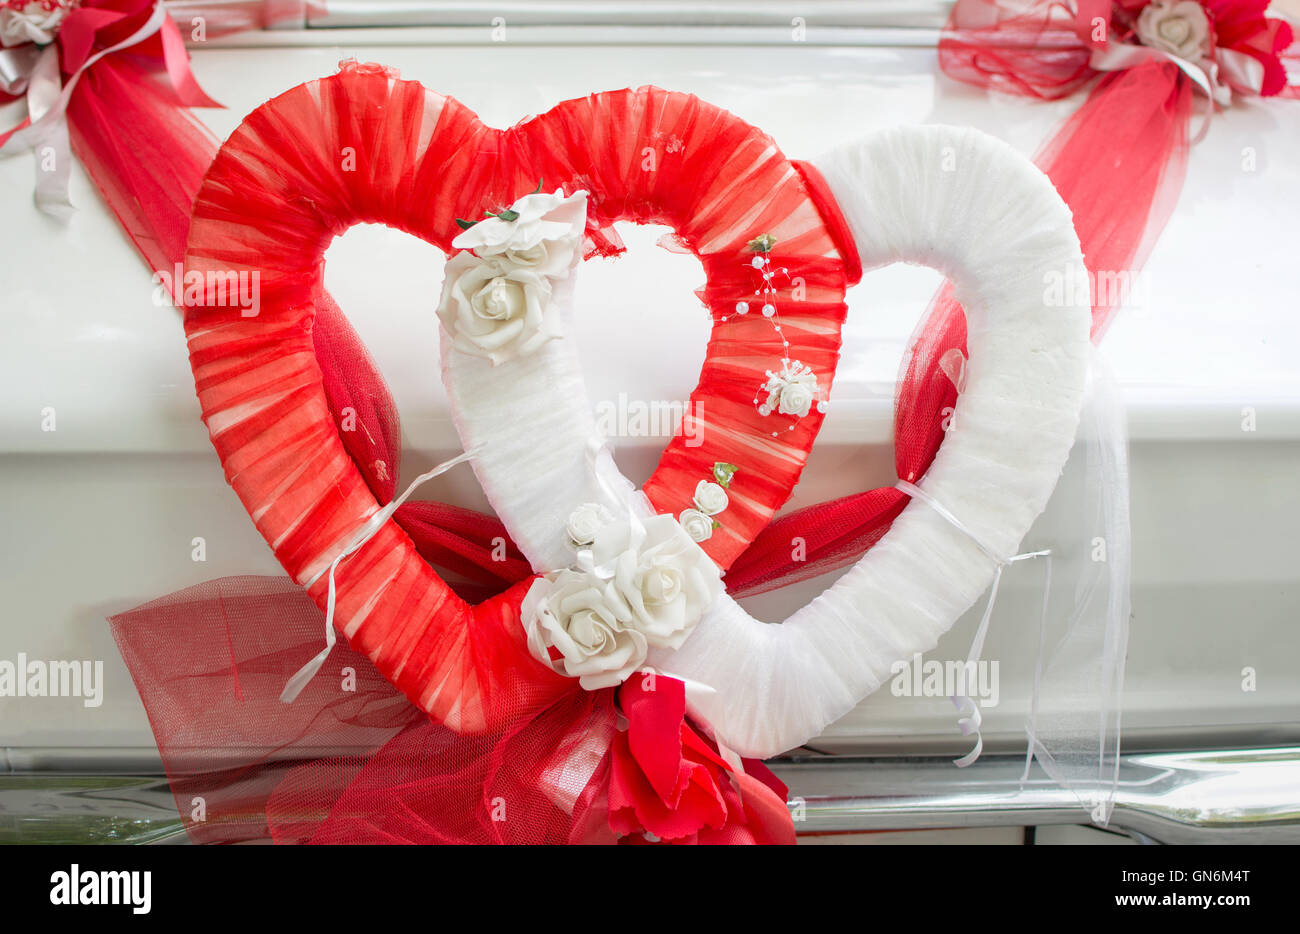 Just Married Hearts Red Wedding Centerpieces